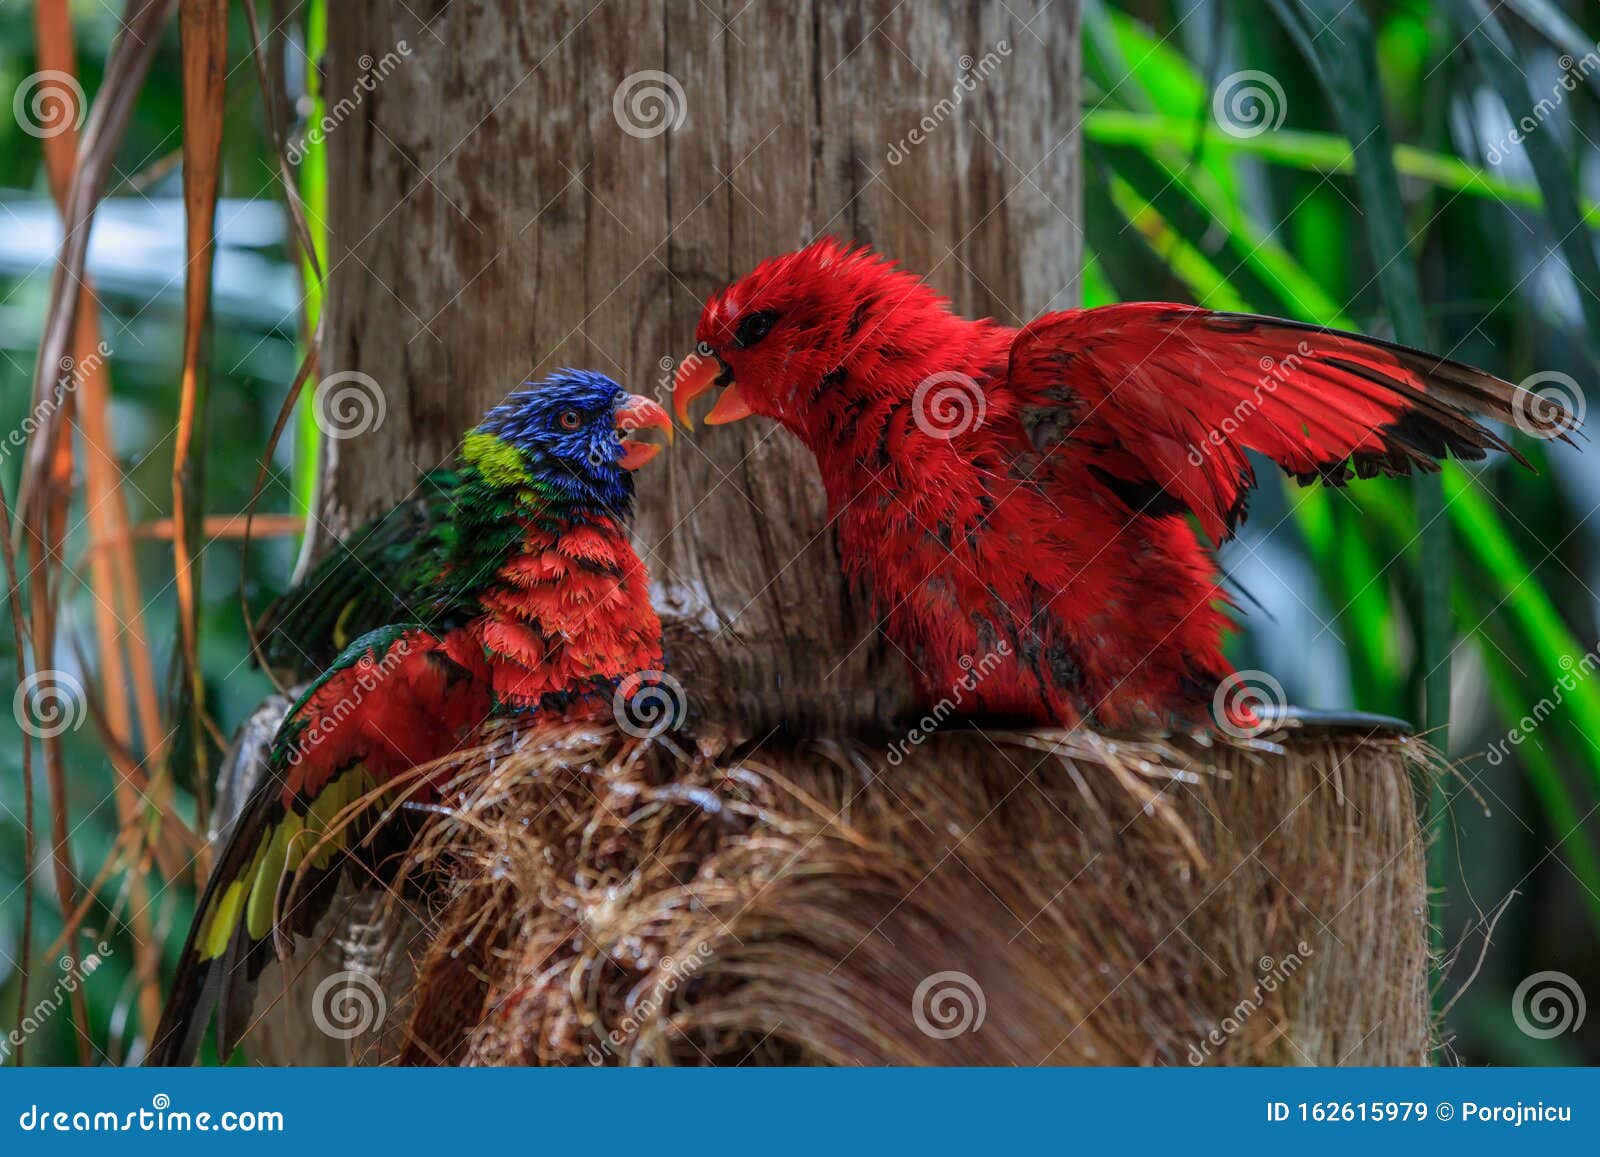 colorful parrots in loro park in tenerife, spain